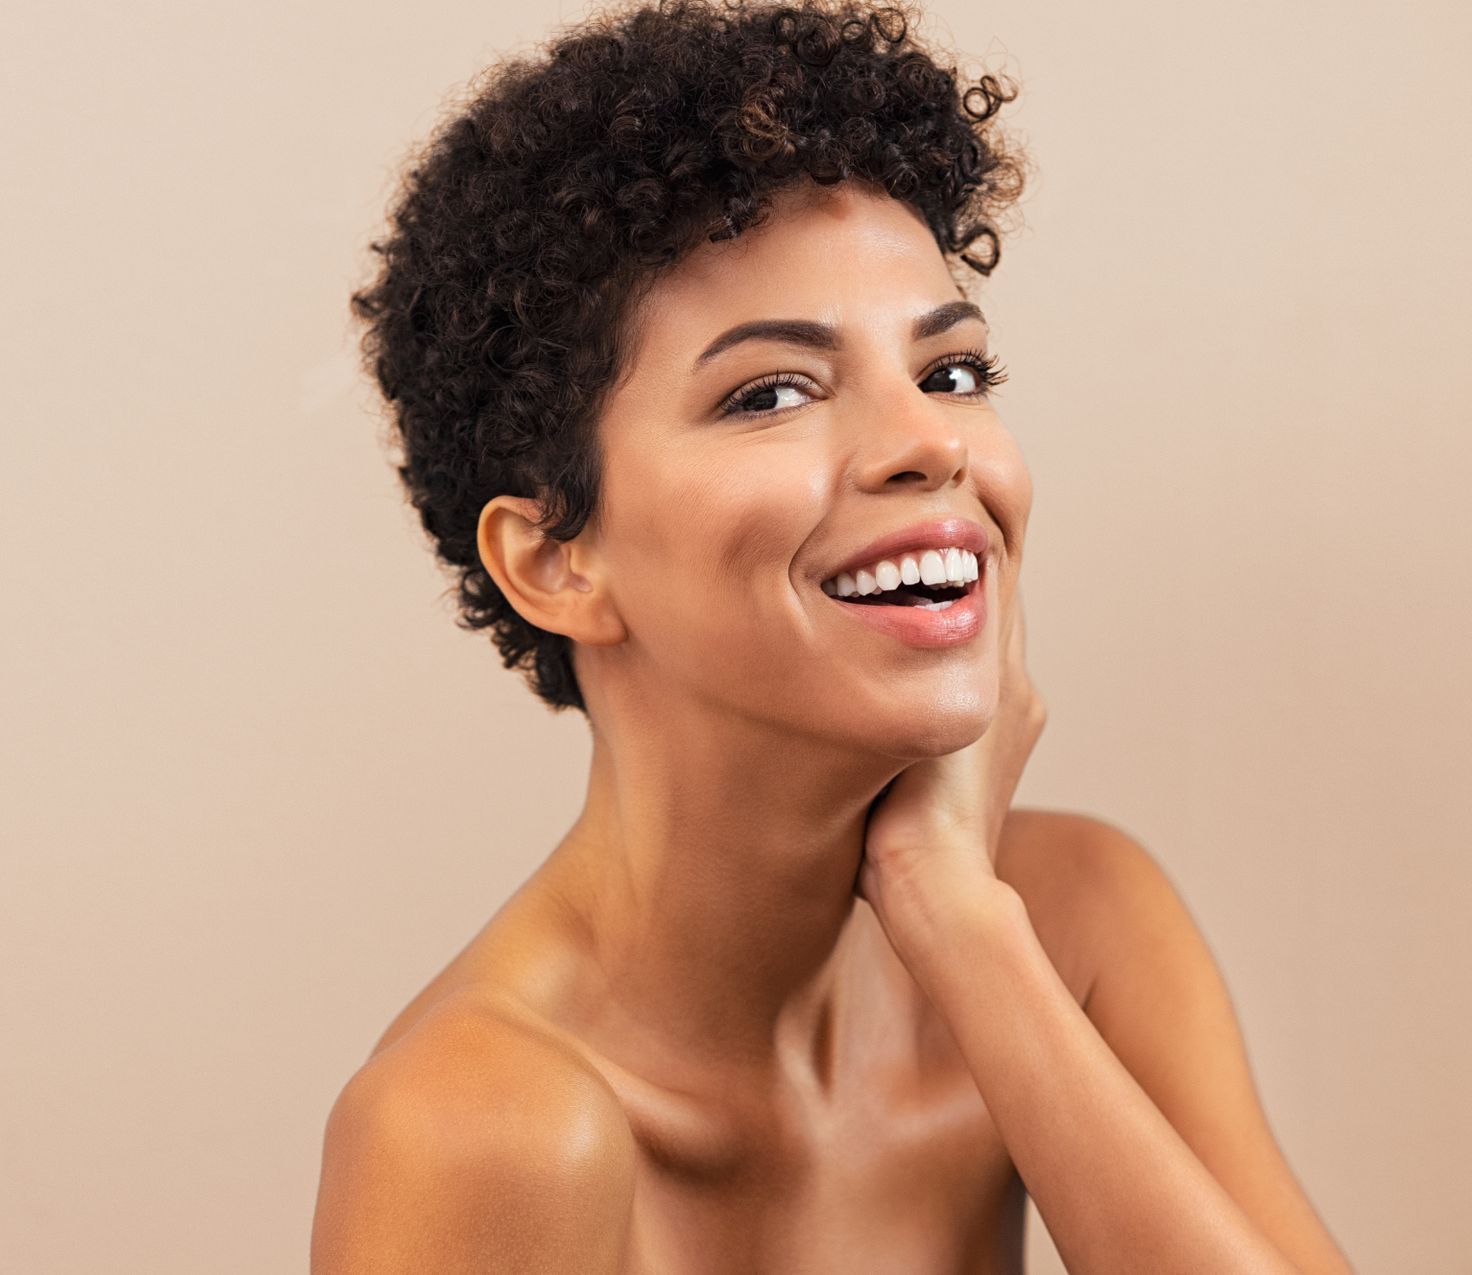 young female skincare model with short curly hair